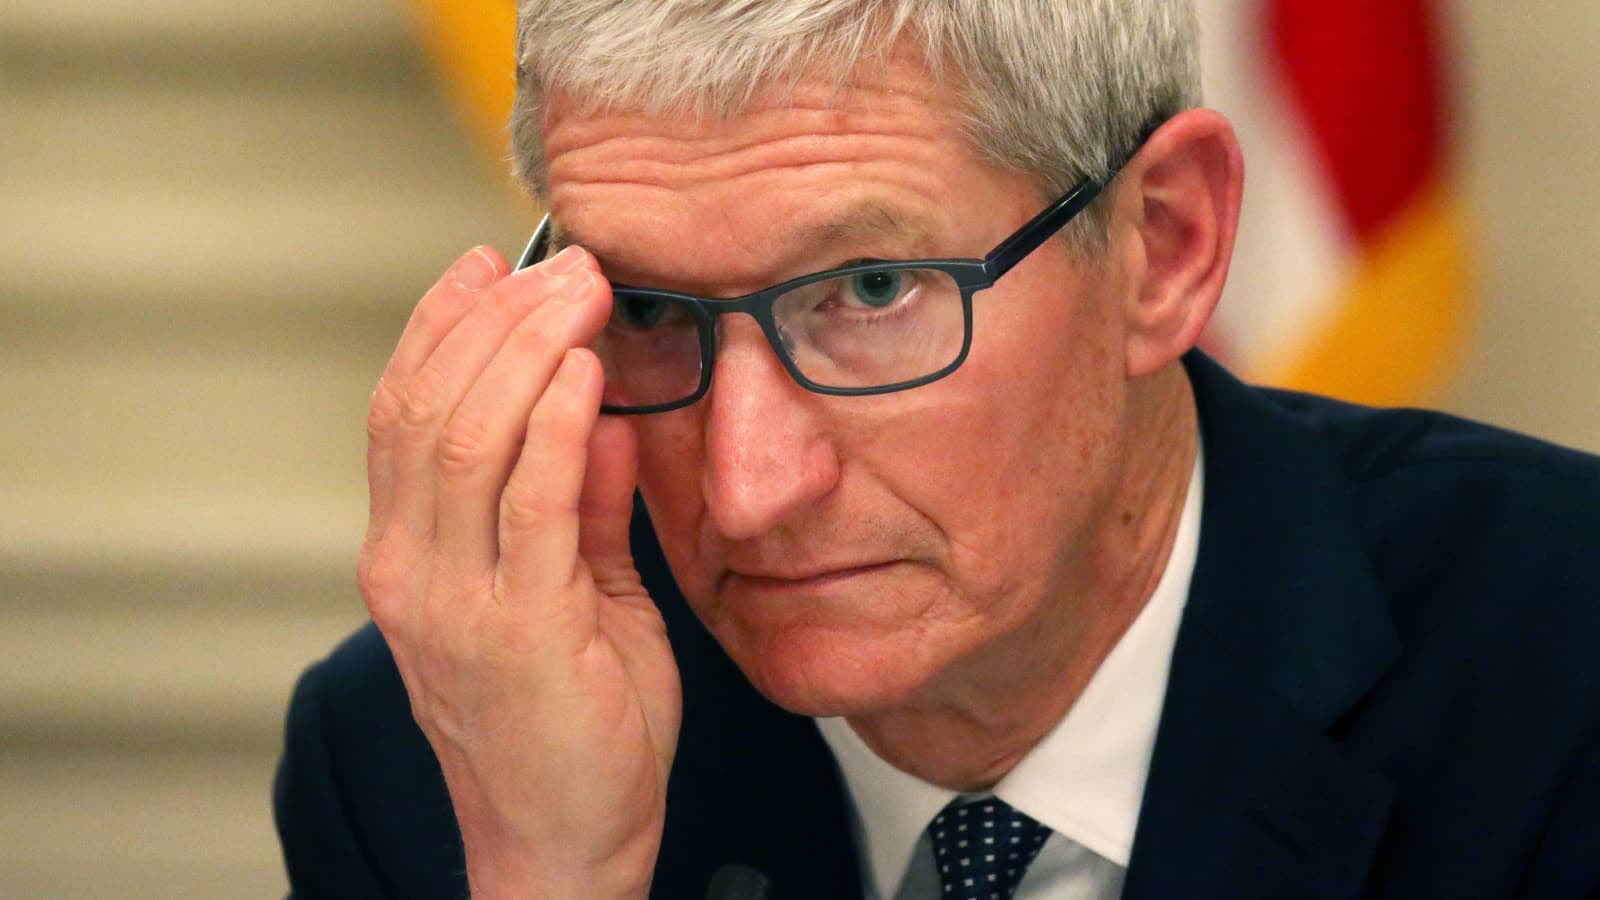 Apple CEO Tim Cook says the company will hunt down every last leaker among employees